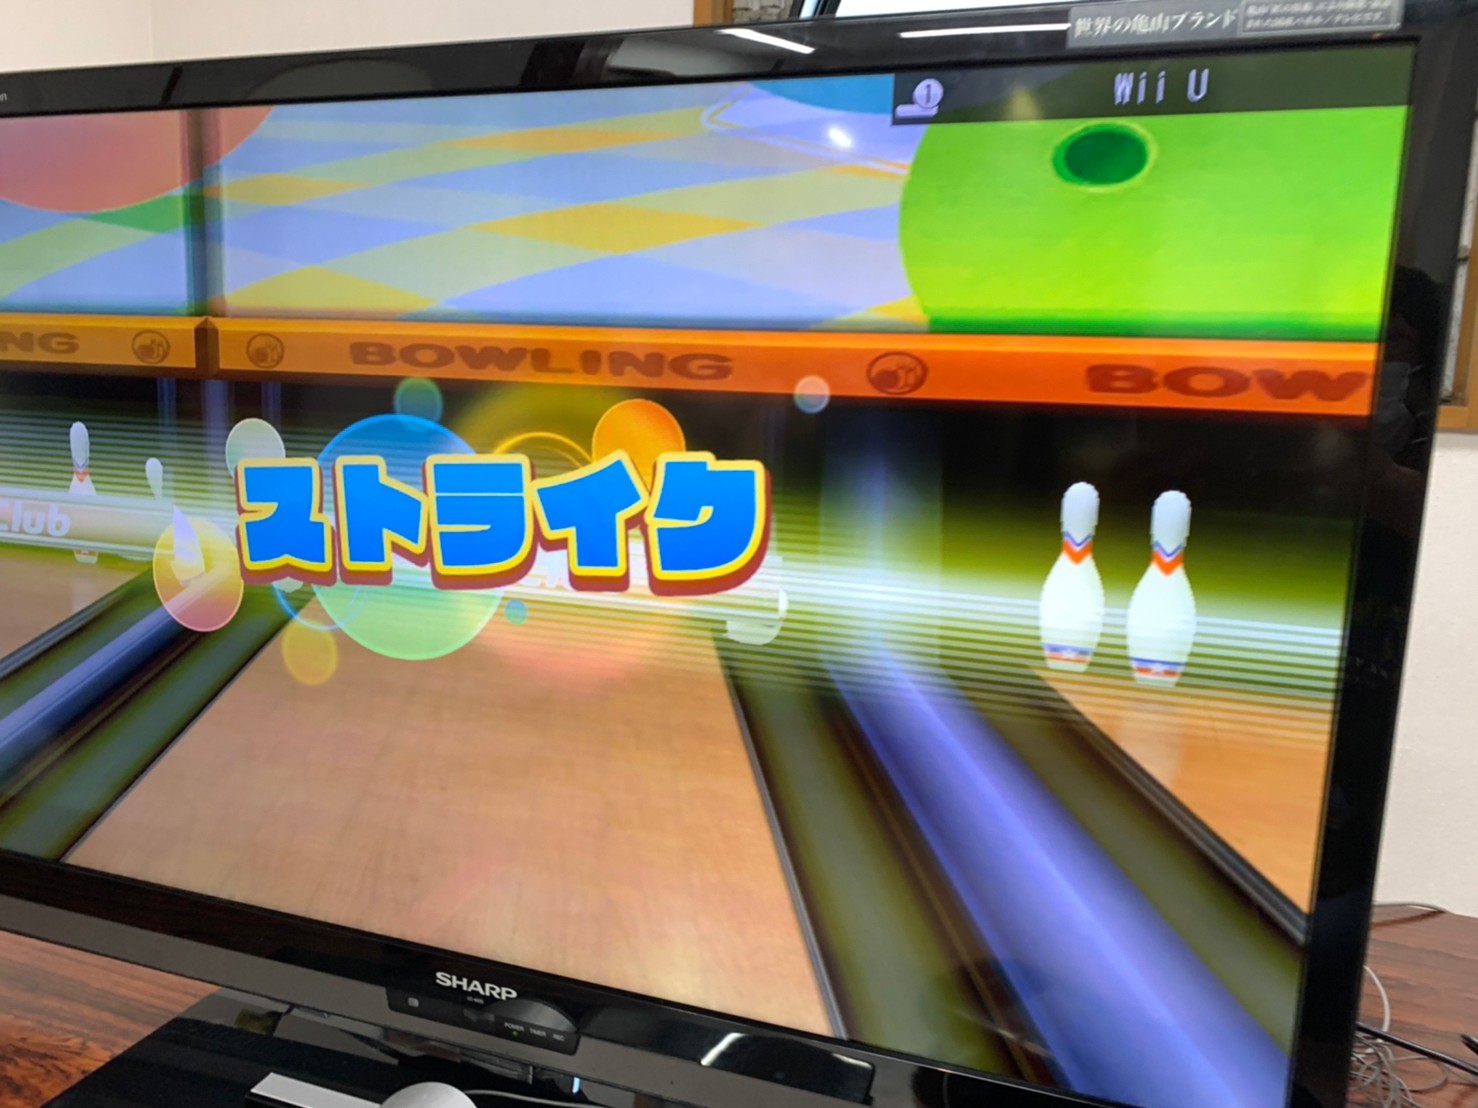 Moonレク　Wiiスポーツ　ボーリング